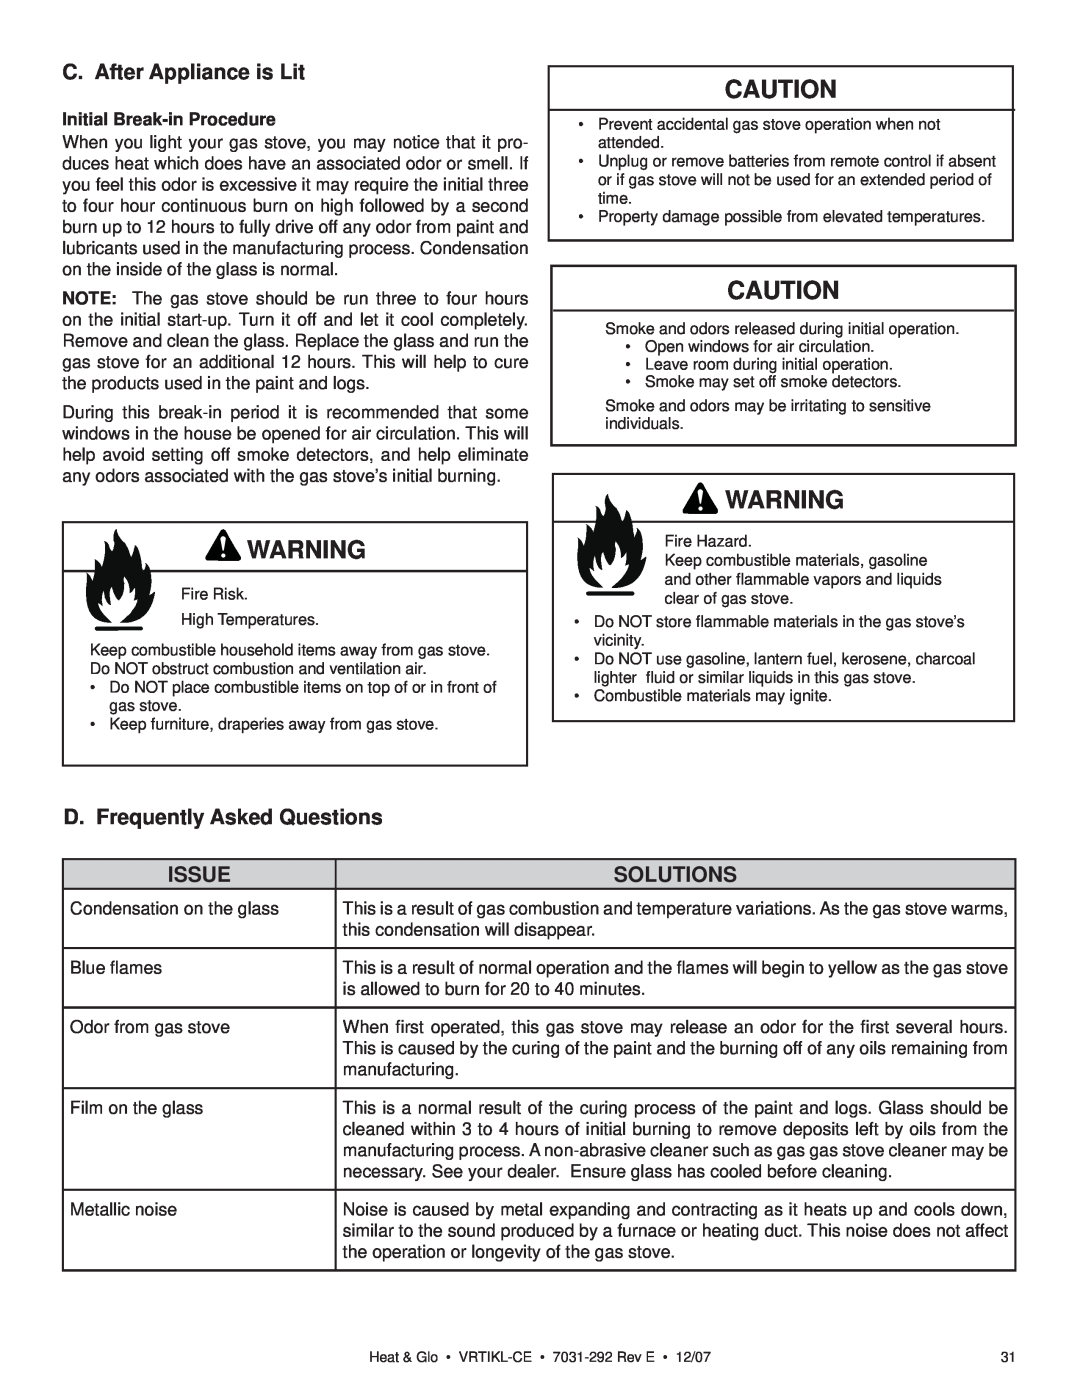 Hearth and Home Technologies VRT-GY-P-CE manual C. After Appliance is Lit, D. Frequently Asked Questions, Issue, Solutions 